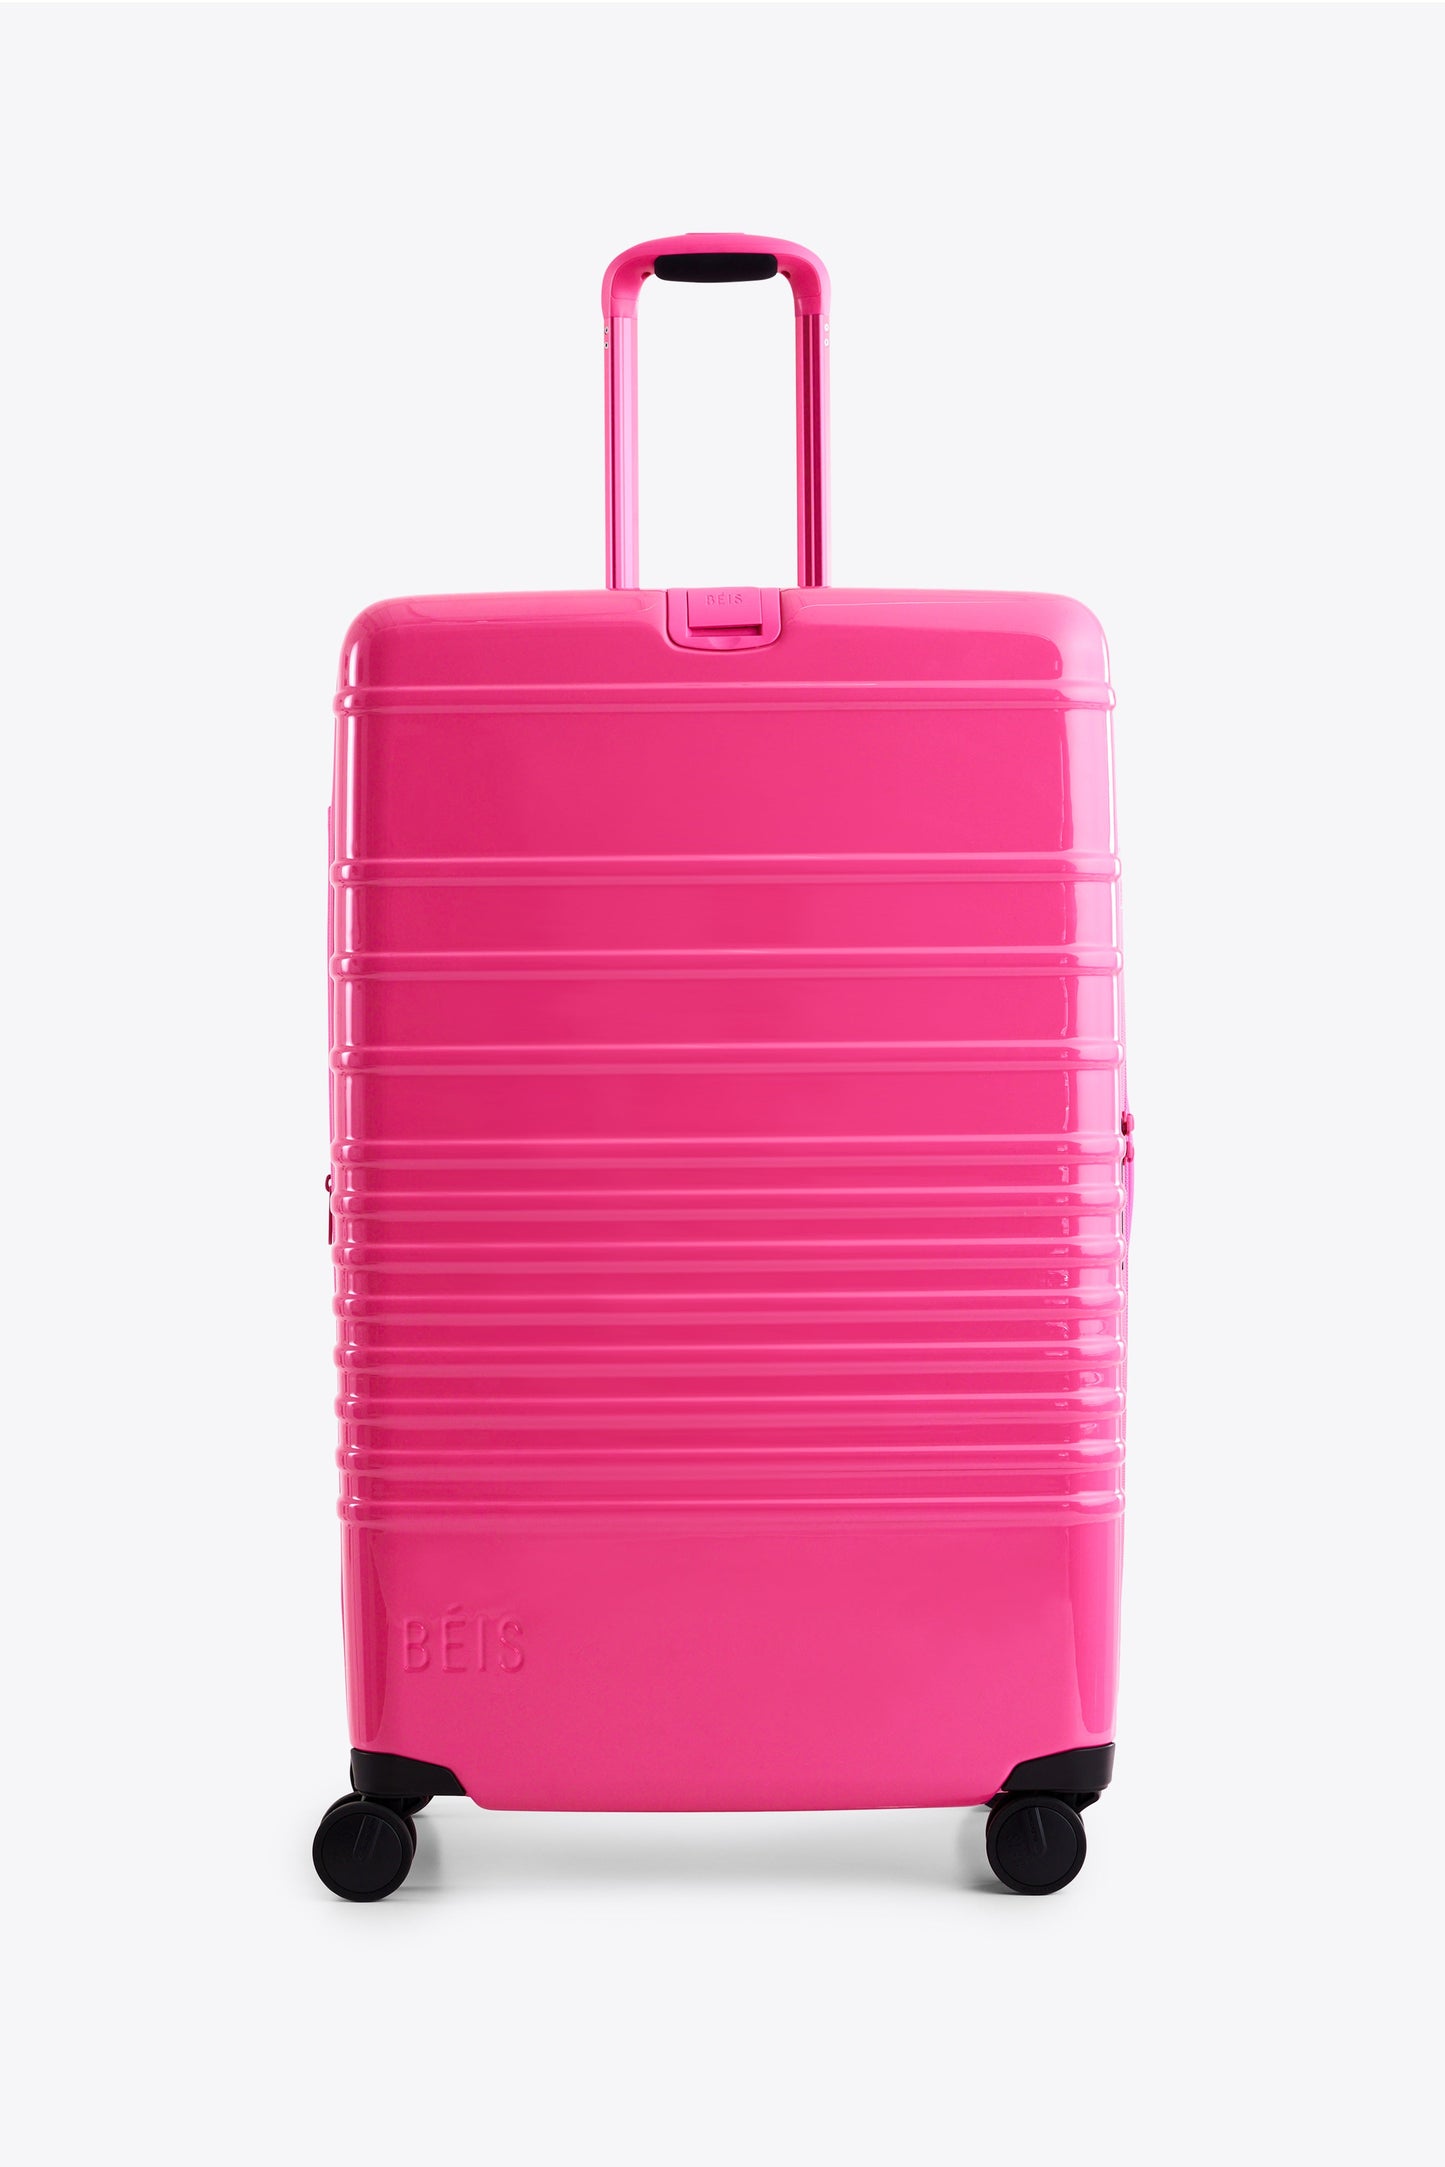 The 29" Large Check-In Roller in Barbie™ Pink